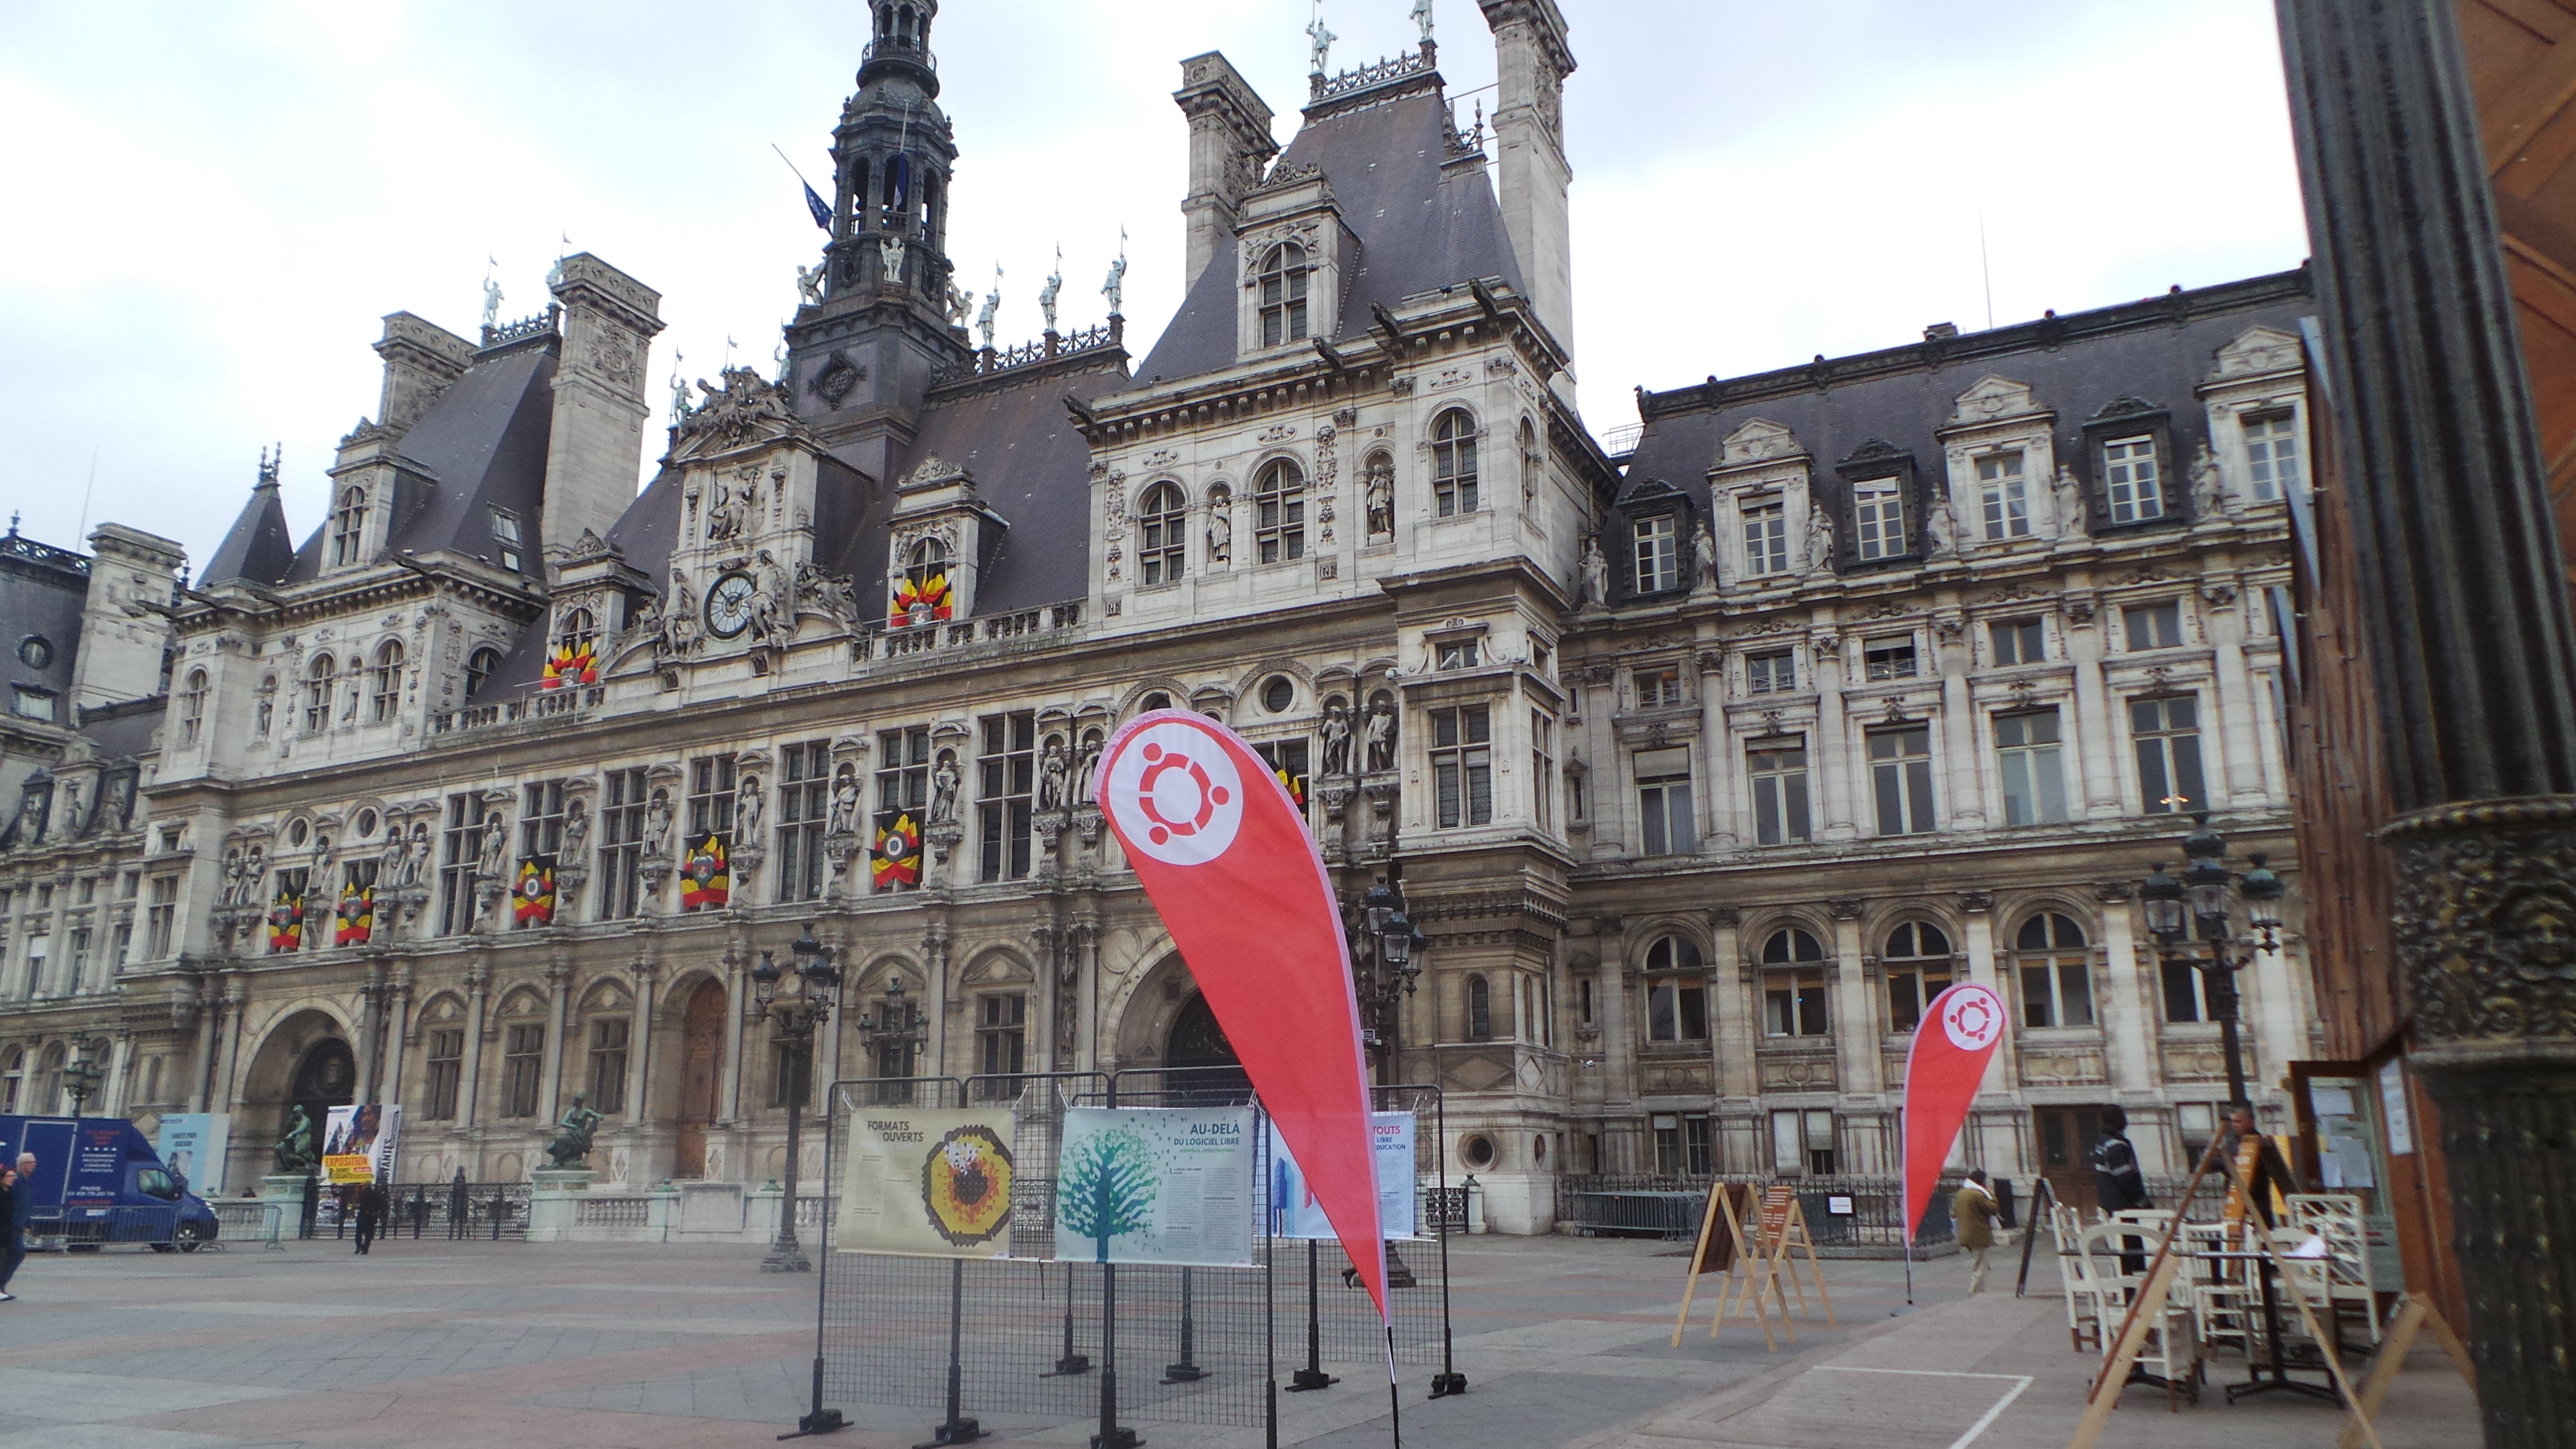 Ubuntu-fr Webcafé in front of the City Hall (March, 23th-27th 2016)